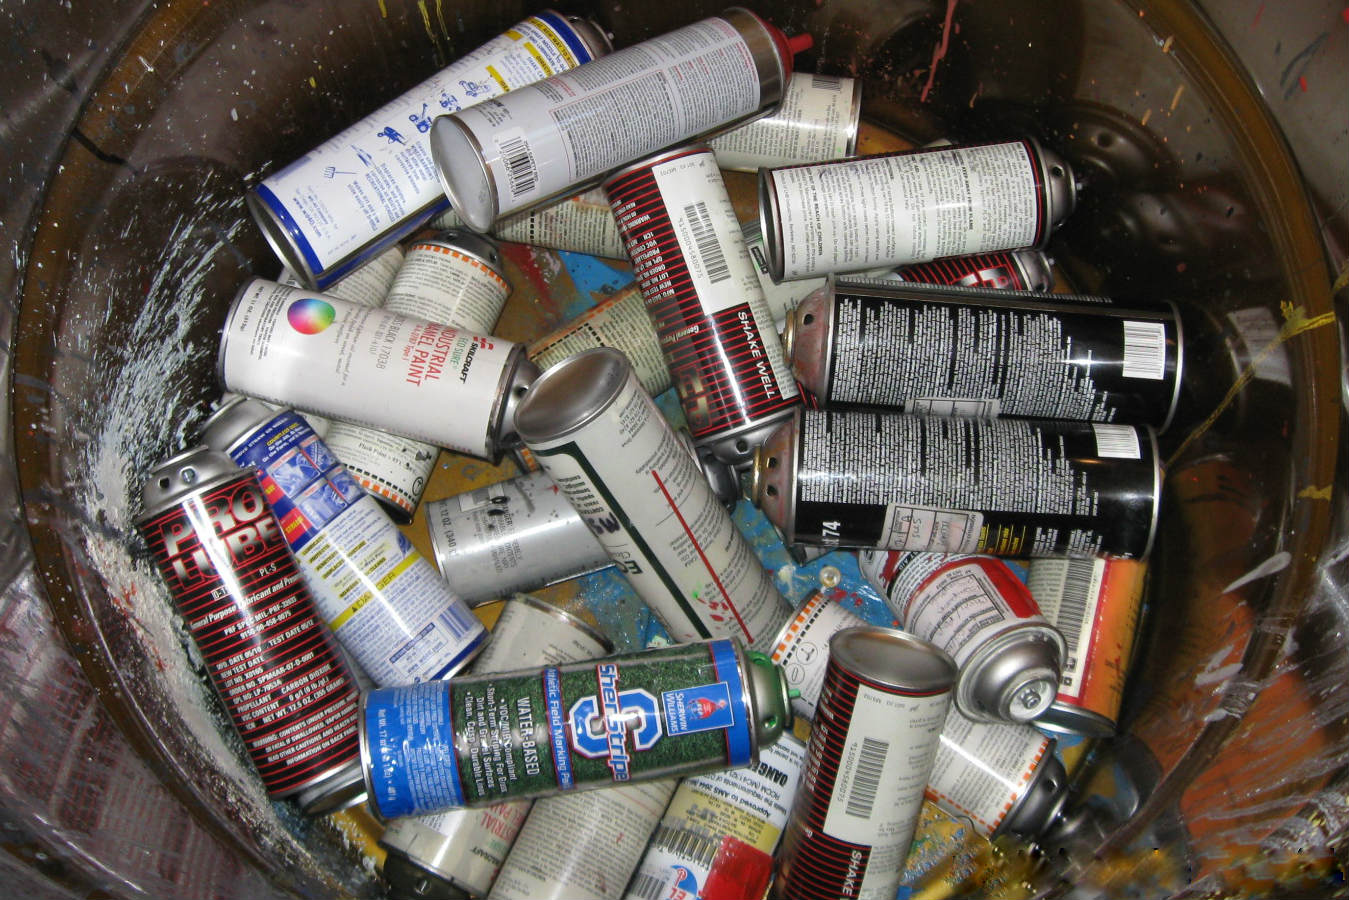 Waste aerosol cans in a drum for disposal